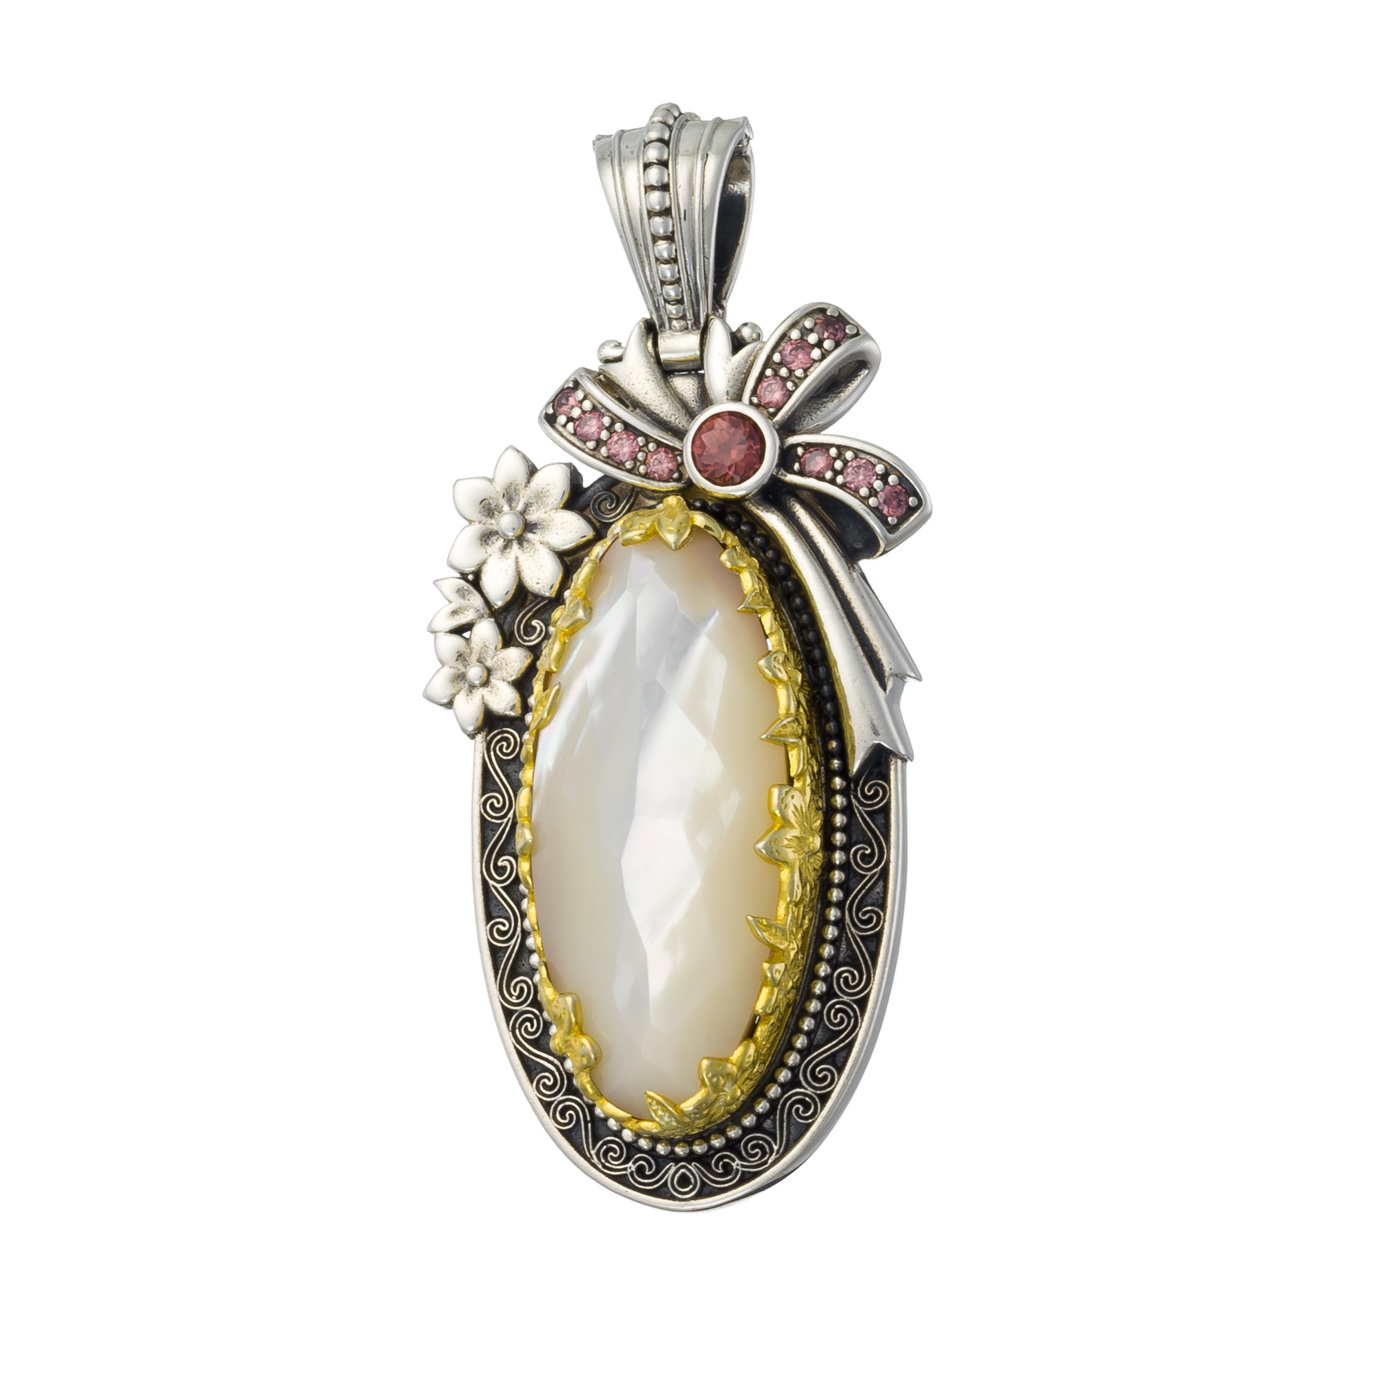 Dione big oval pendant in Sterling silver with Gold plated parts